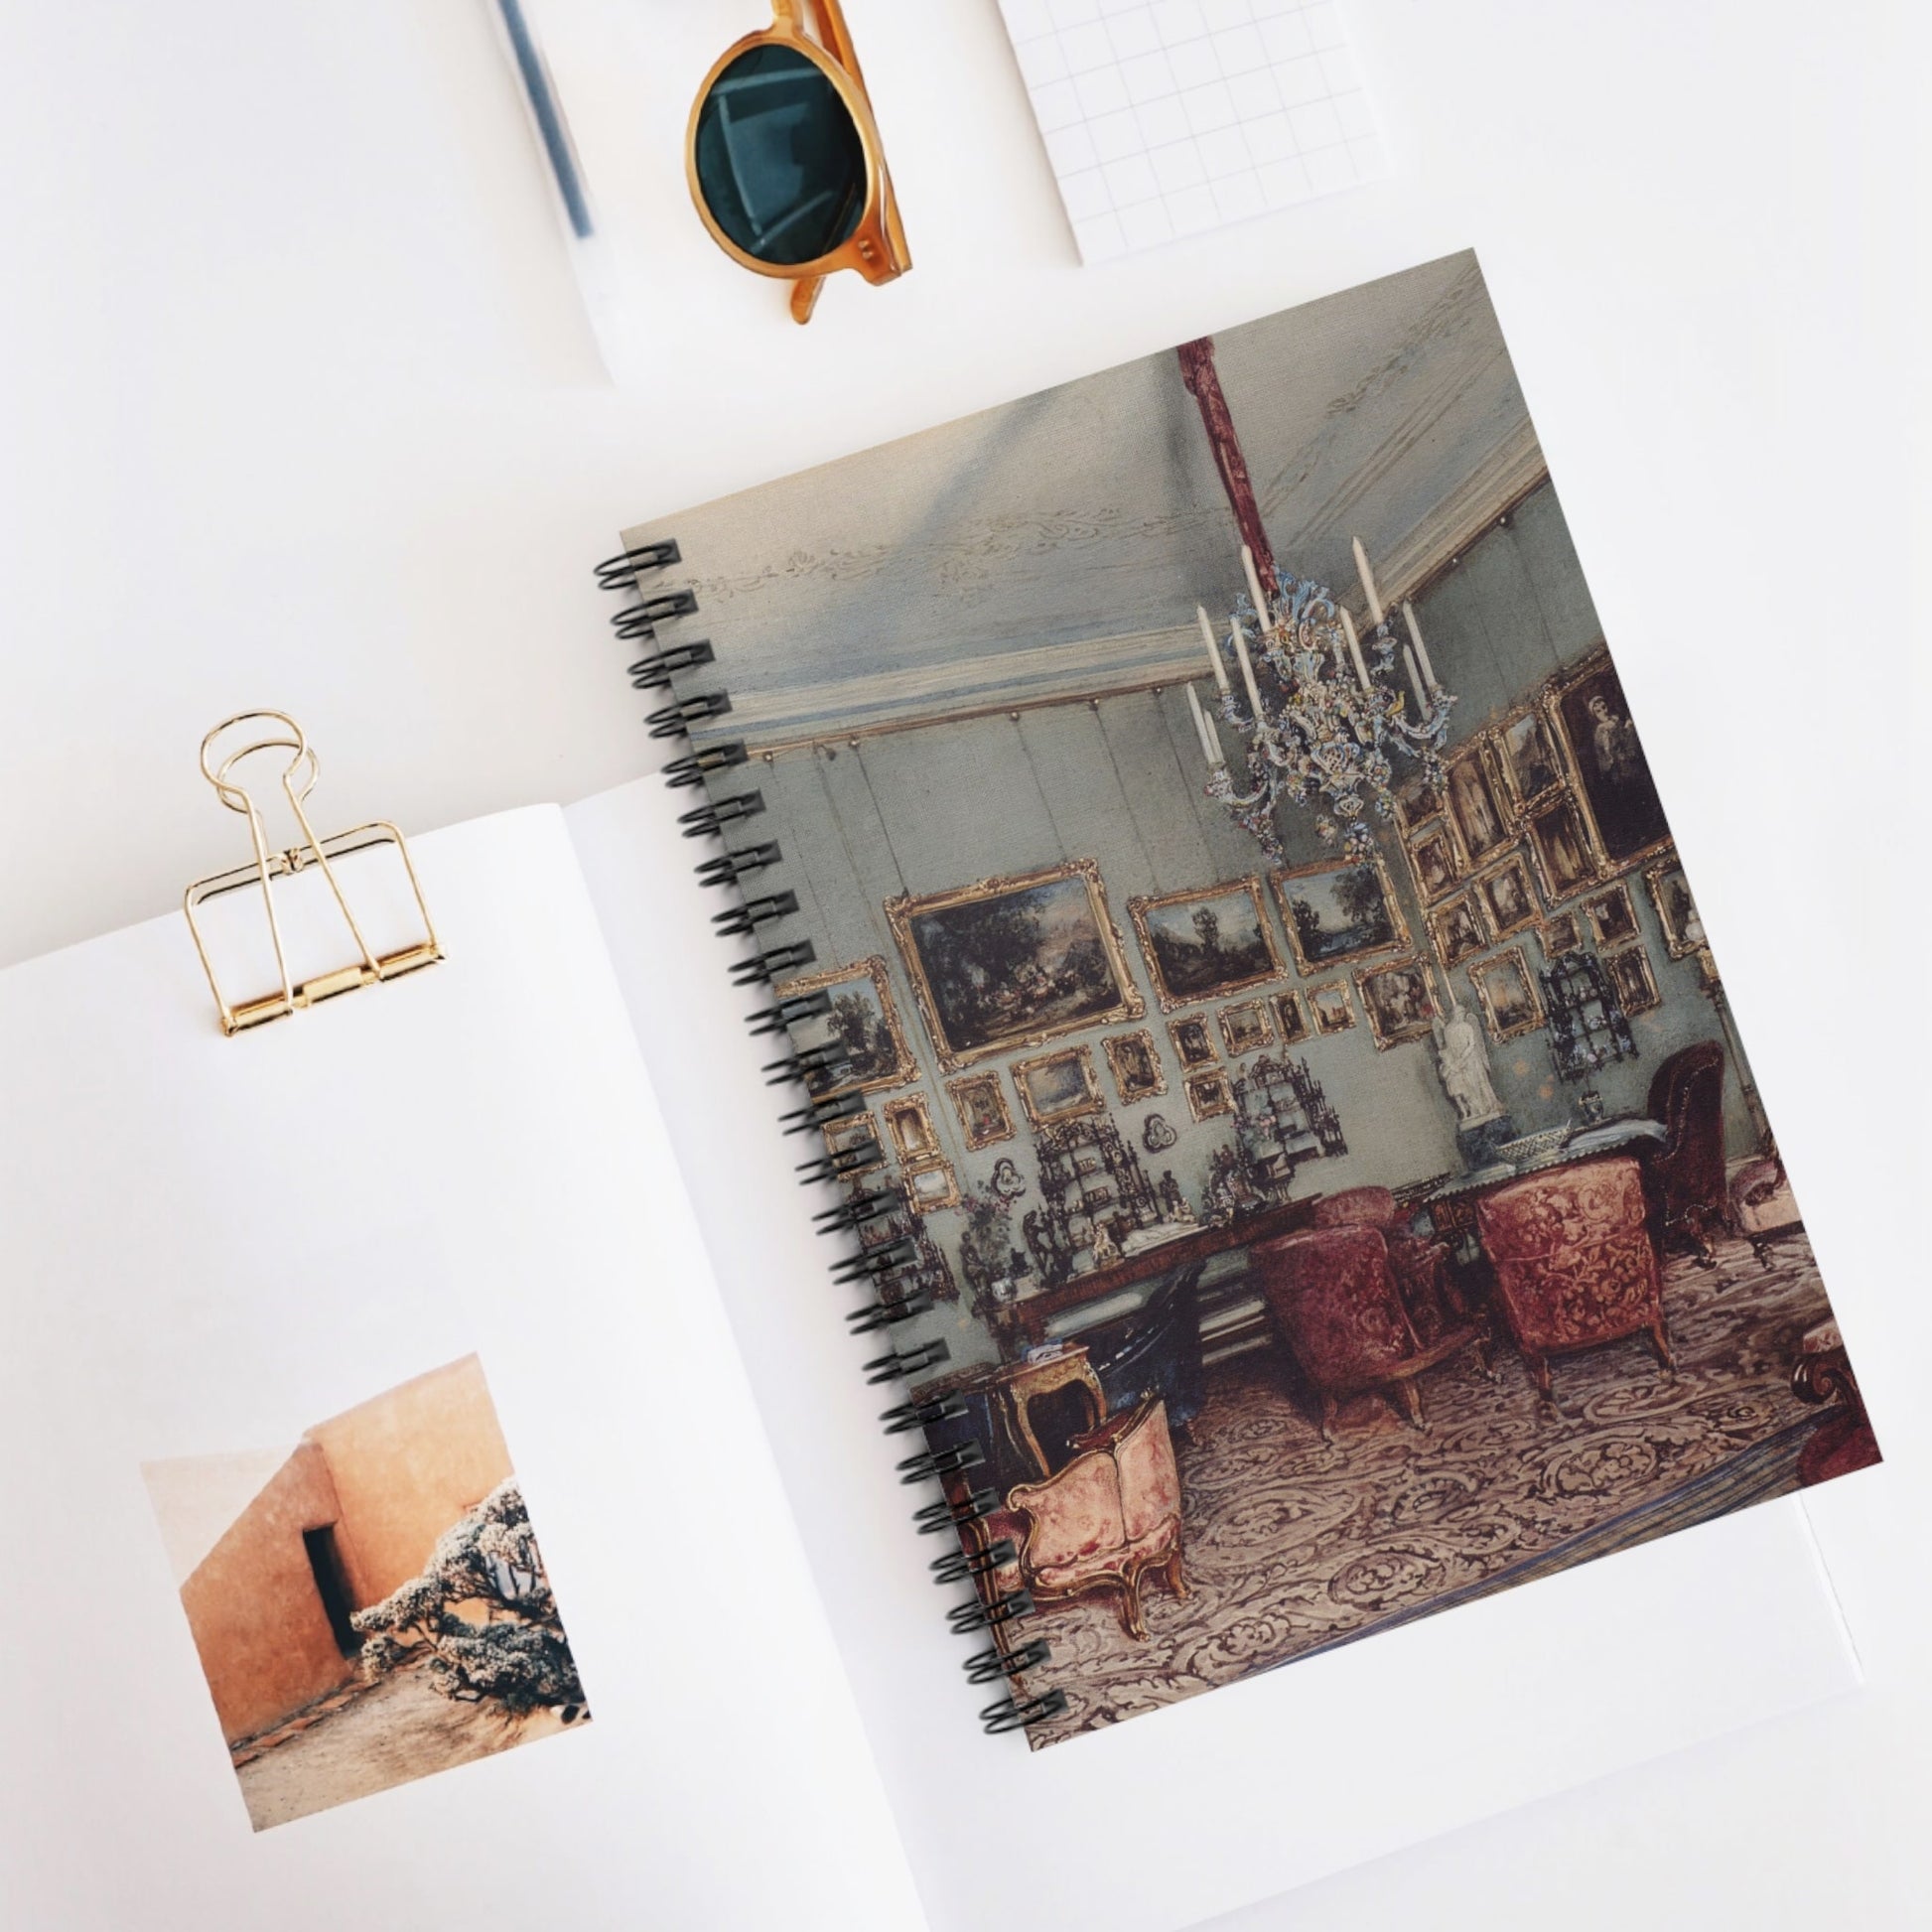 Aesthetic Victorian Spiral Notebook Displayed on Desk